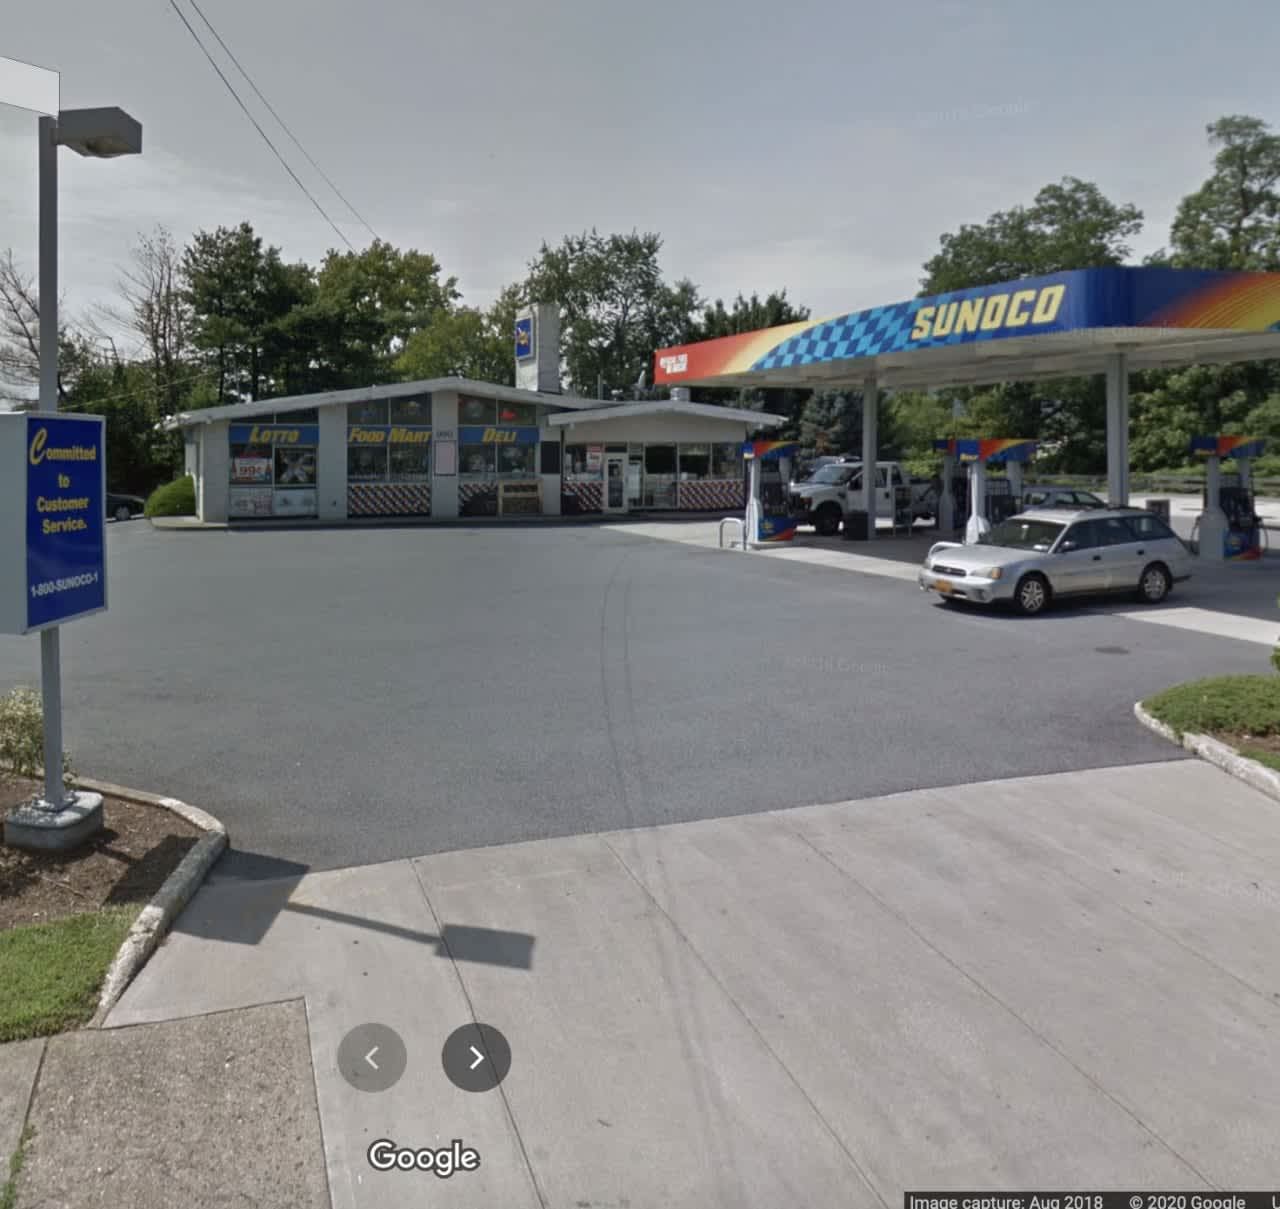 Police are searching for a man who robbed a gas station at gunpoint.